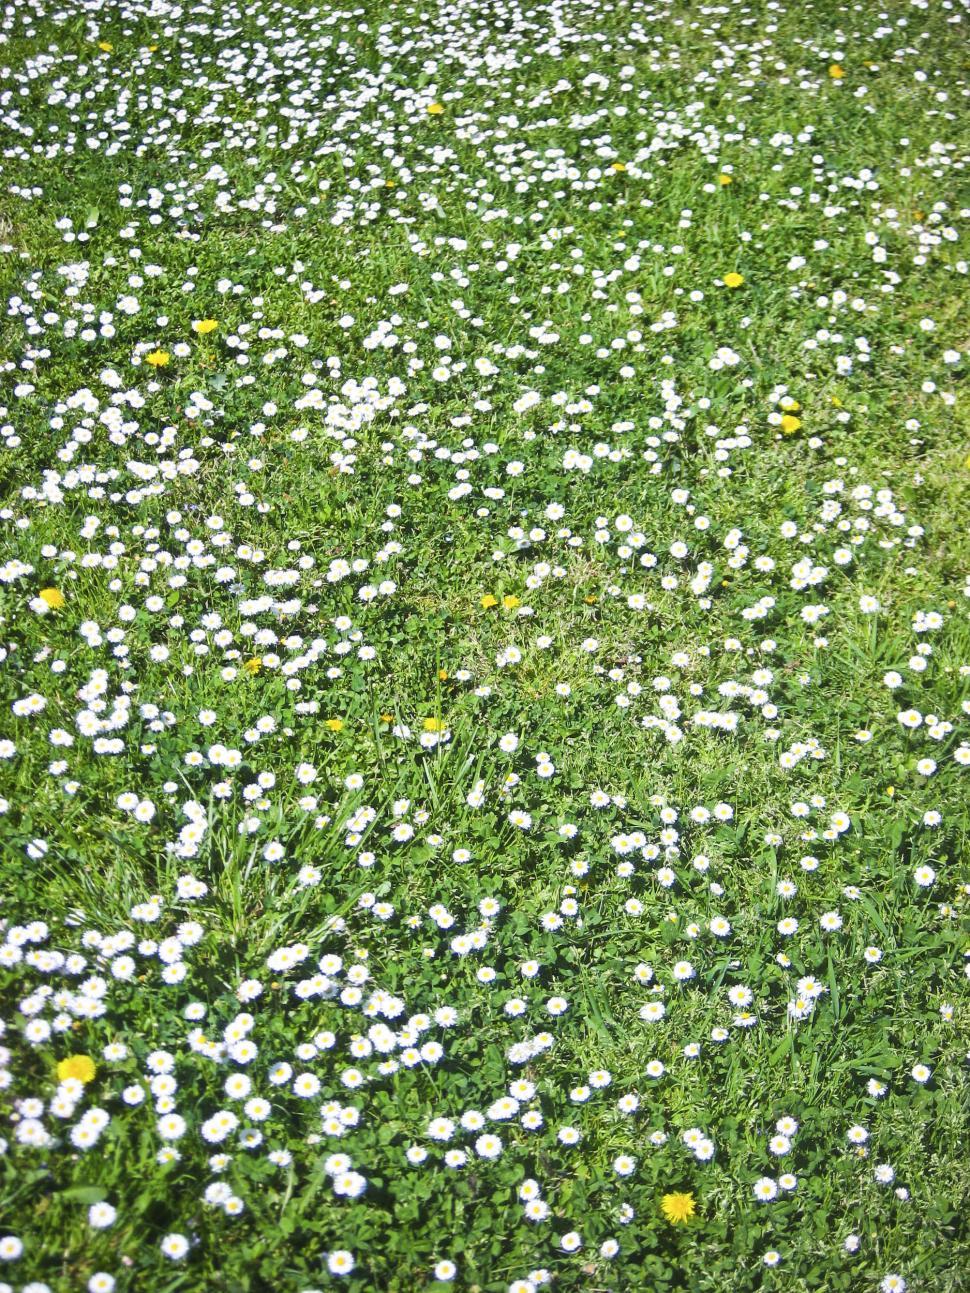 Free Image of grass and flowers 